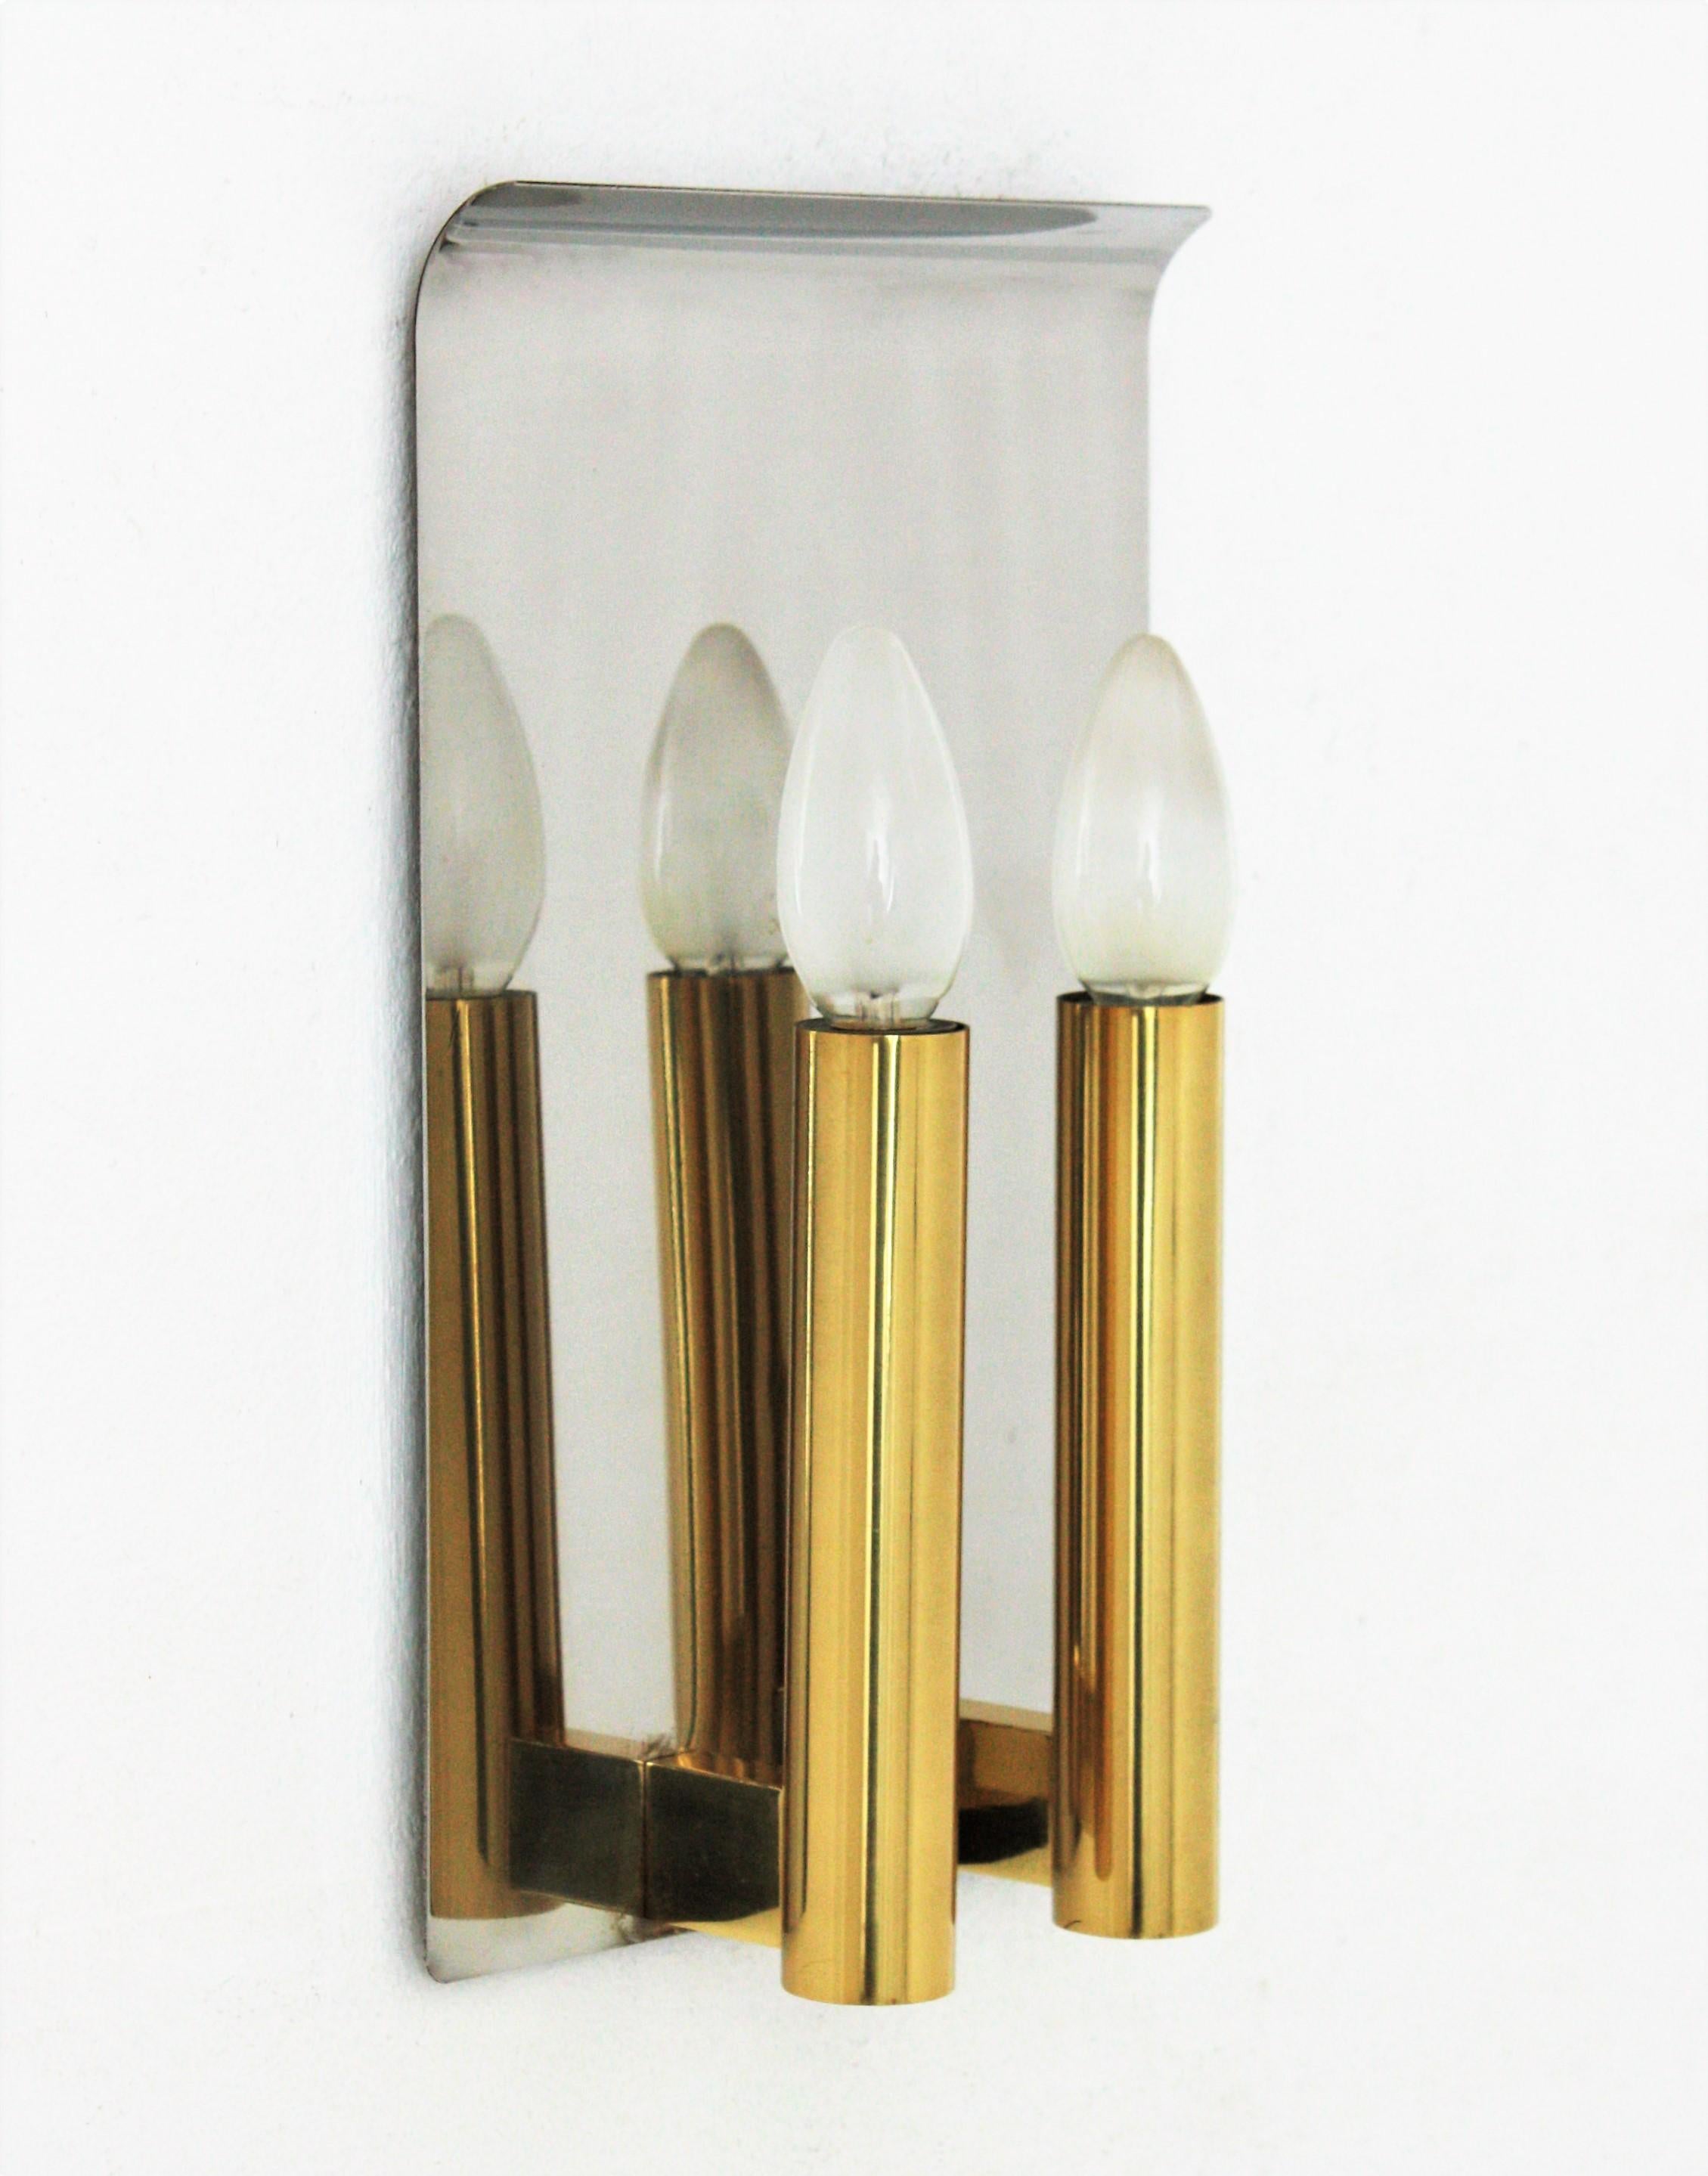 20th Century Sciolari Wall Sconce in Brass and Steel, Italy, 1960s For Sale